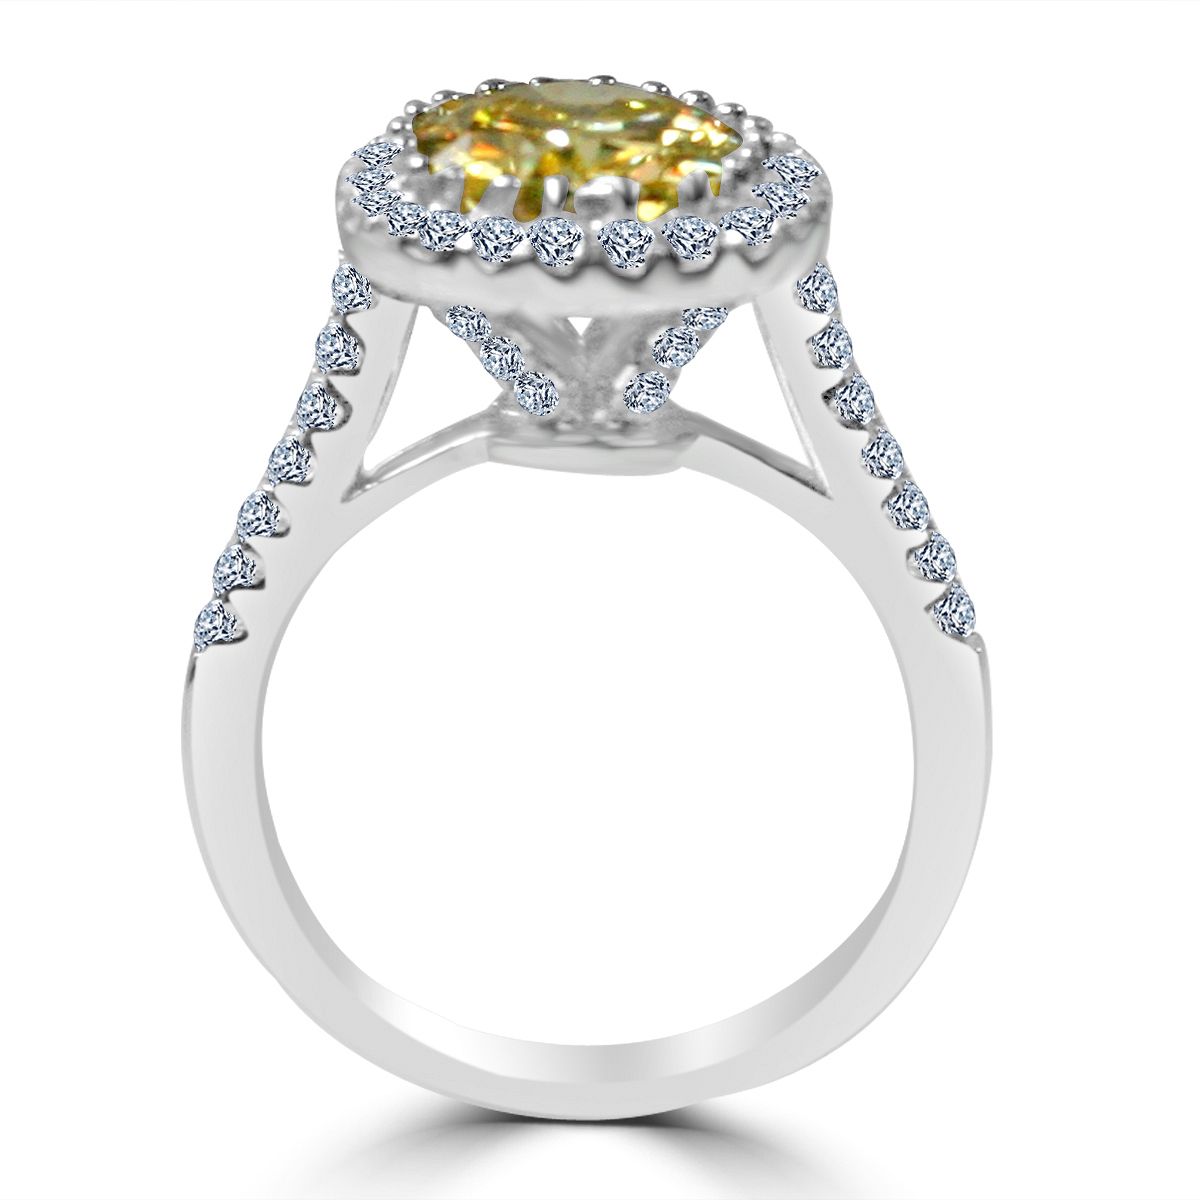 3.5CT(9x11mm) intense Canary Diamond Veneer Cubic zirconia Oval Center w/Halo Pave set Sterling Silver modern style Ring. 635R0245